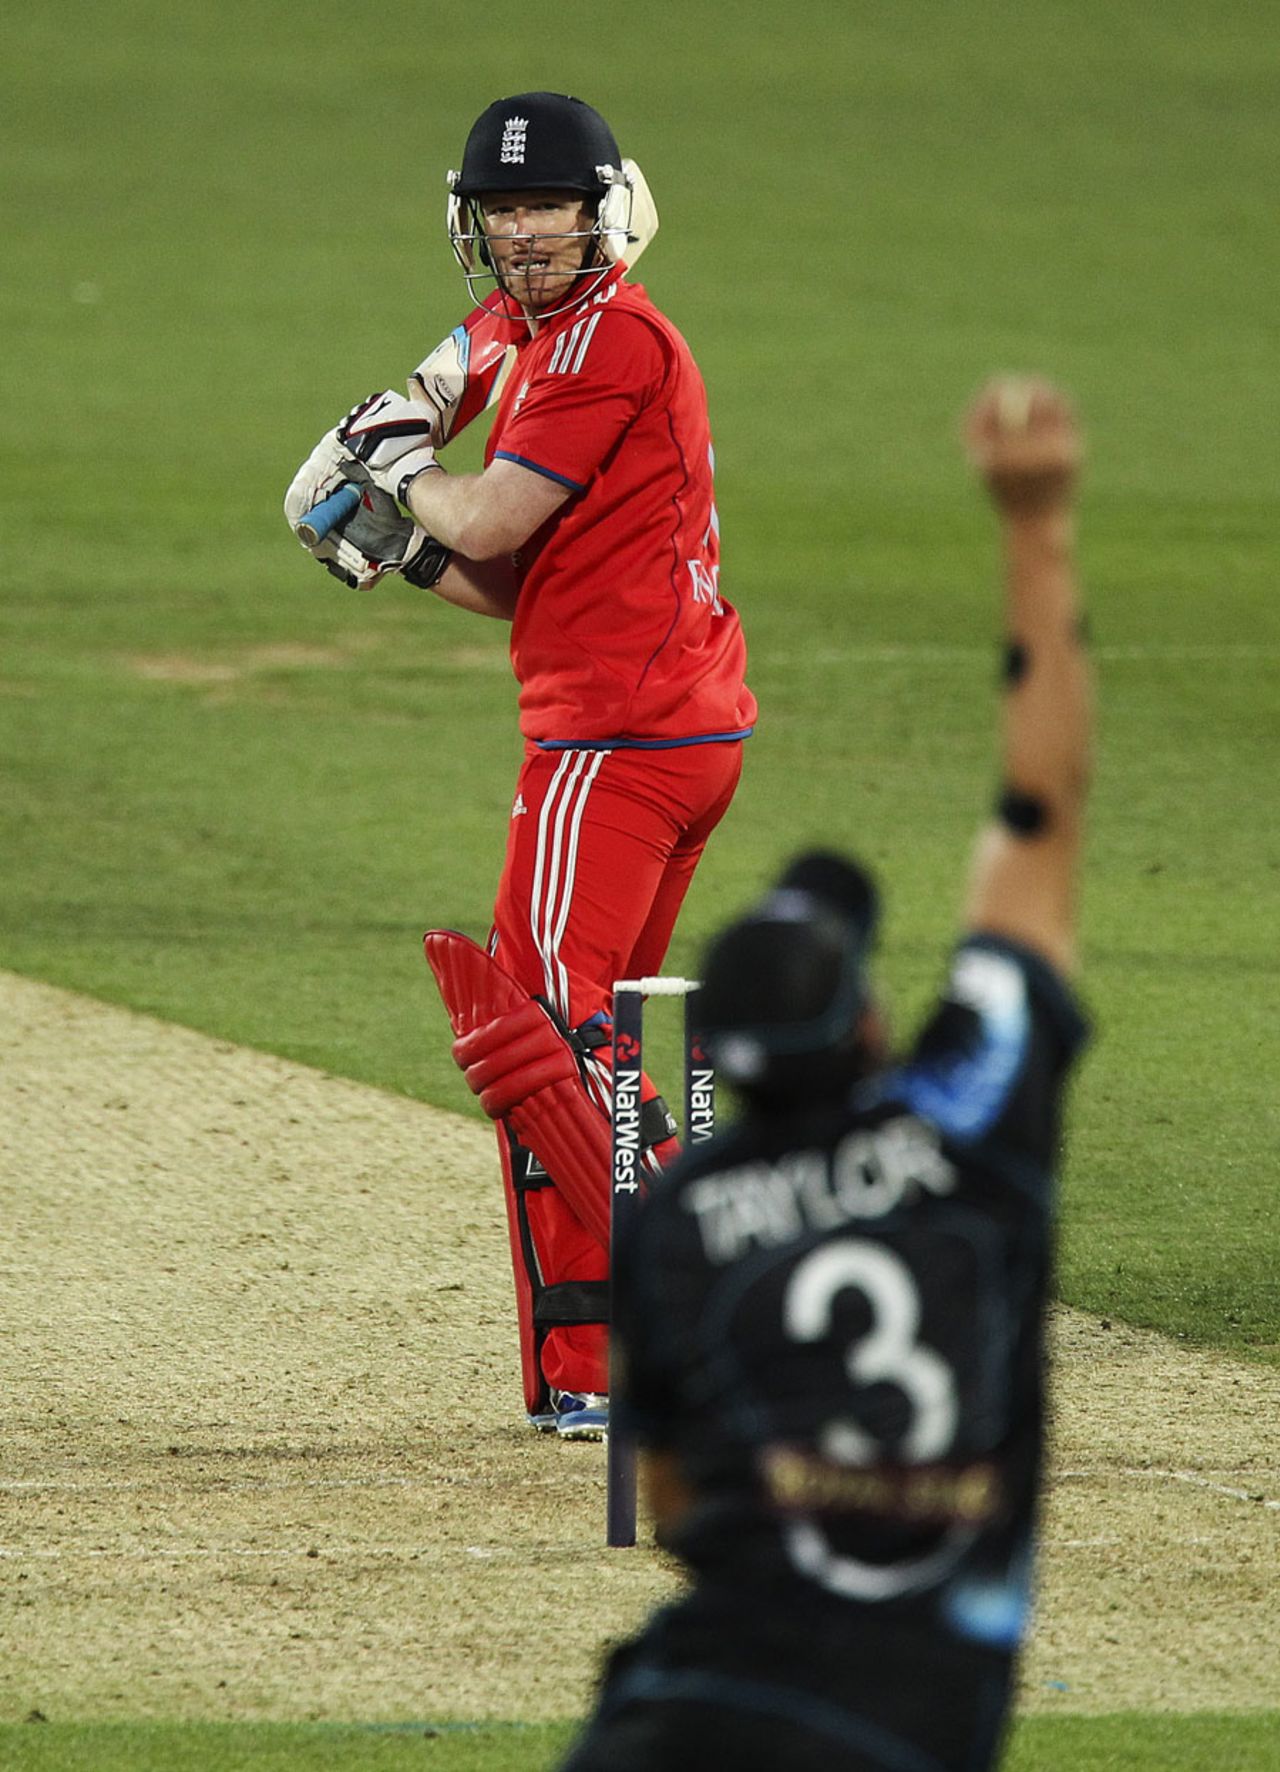 Ross Taylor reaches high to take Eoin Morgan at slip, England v New Zealand, 1st T20, The Oval, June 25, 2013